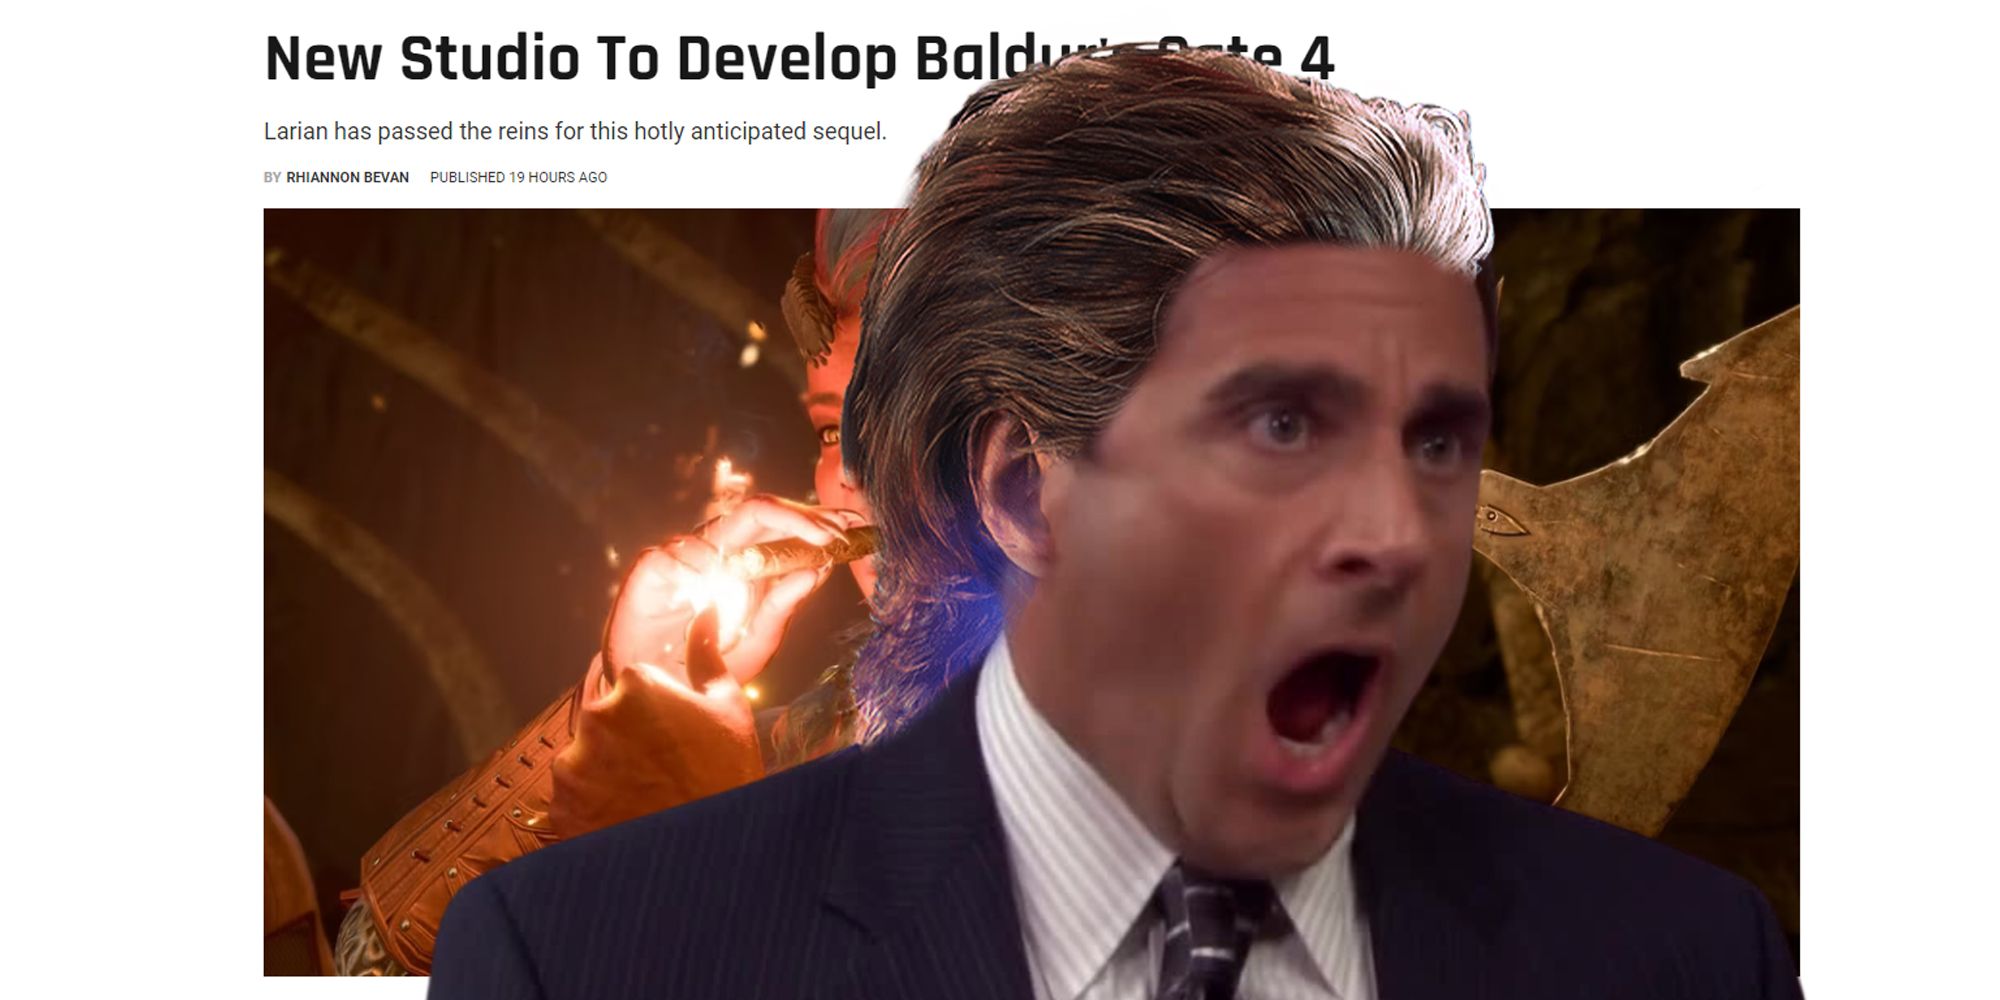 Michael Scott no god please no meme, but Steve Carell has Gale's hair and his image is in front of a news article about Larian not making Baldur's Gate 4